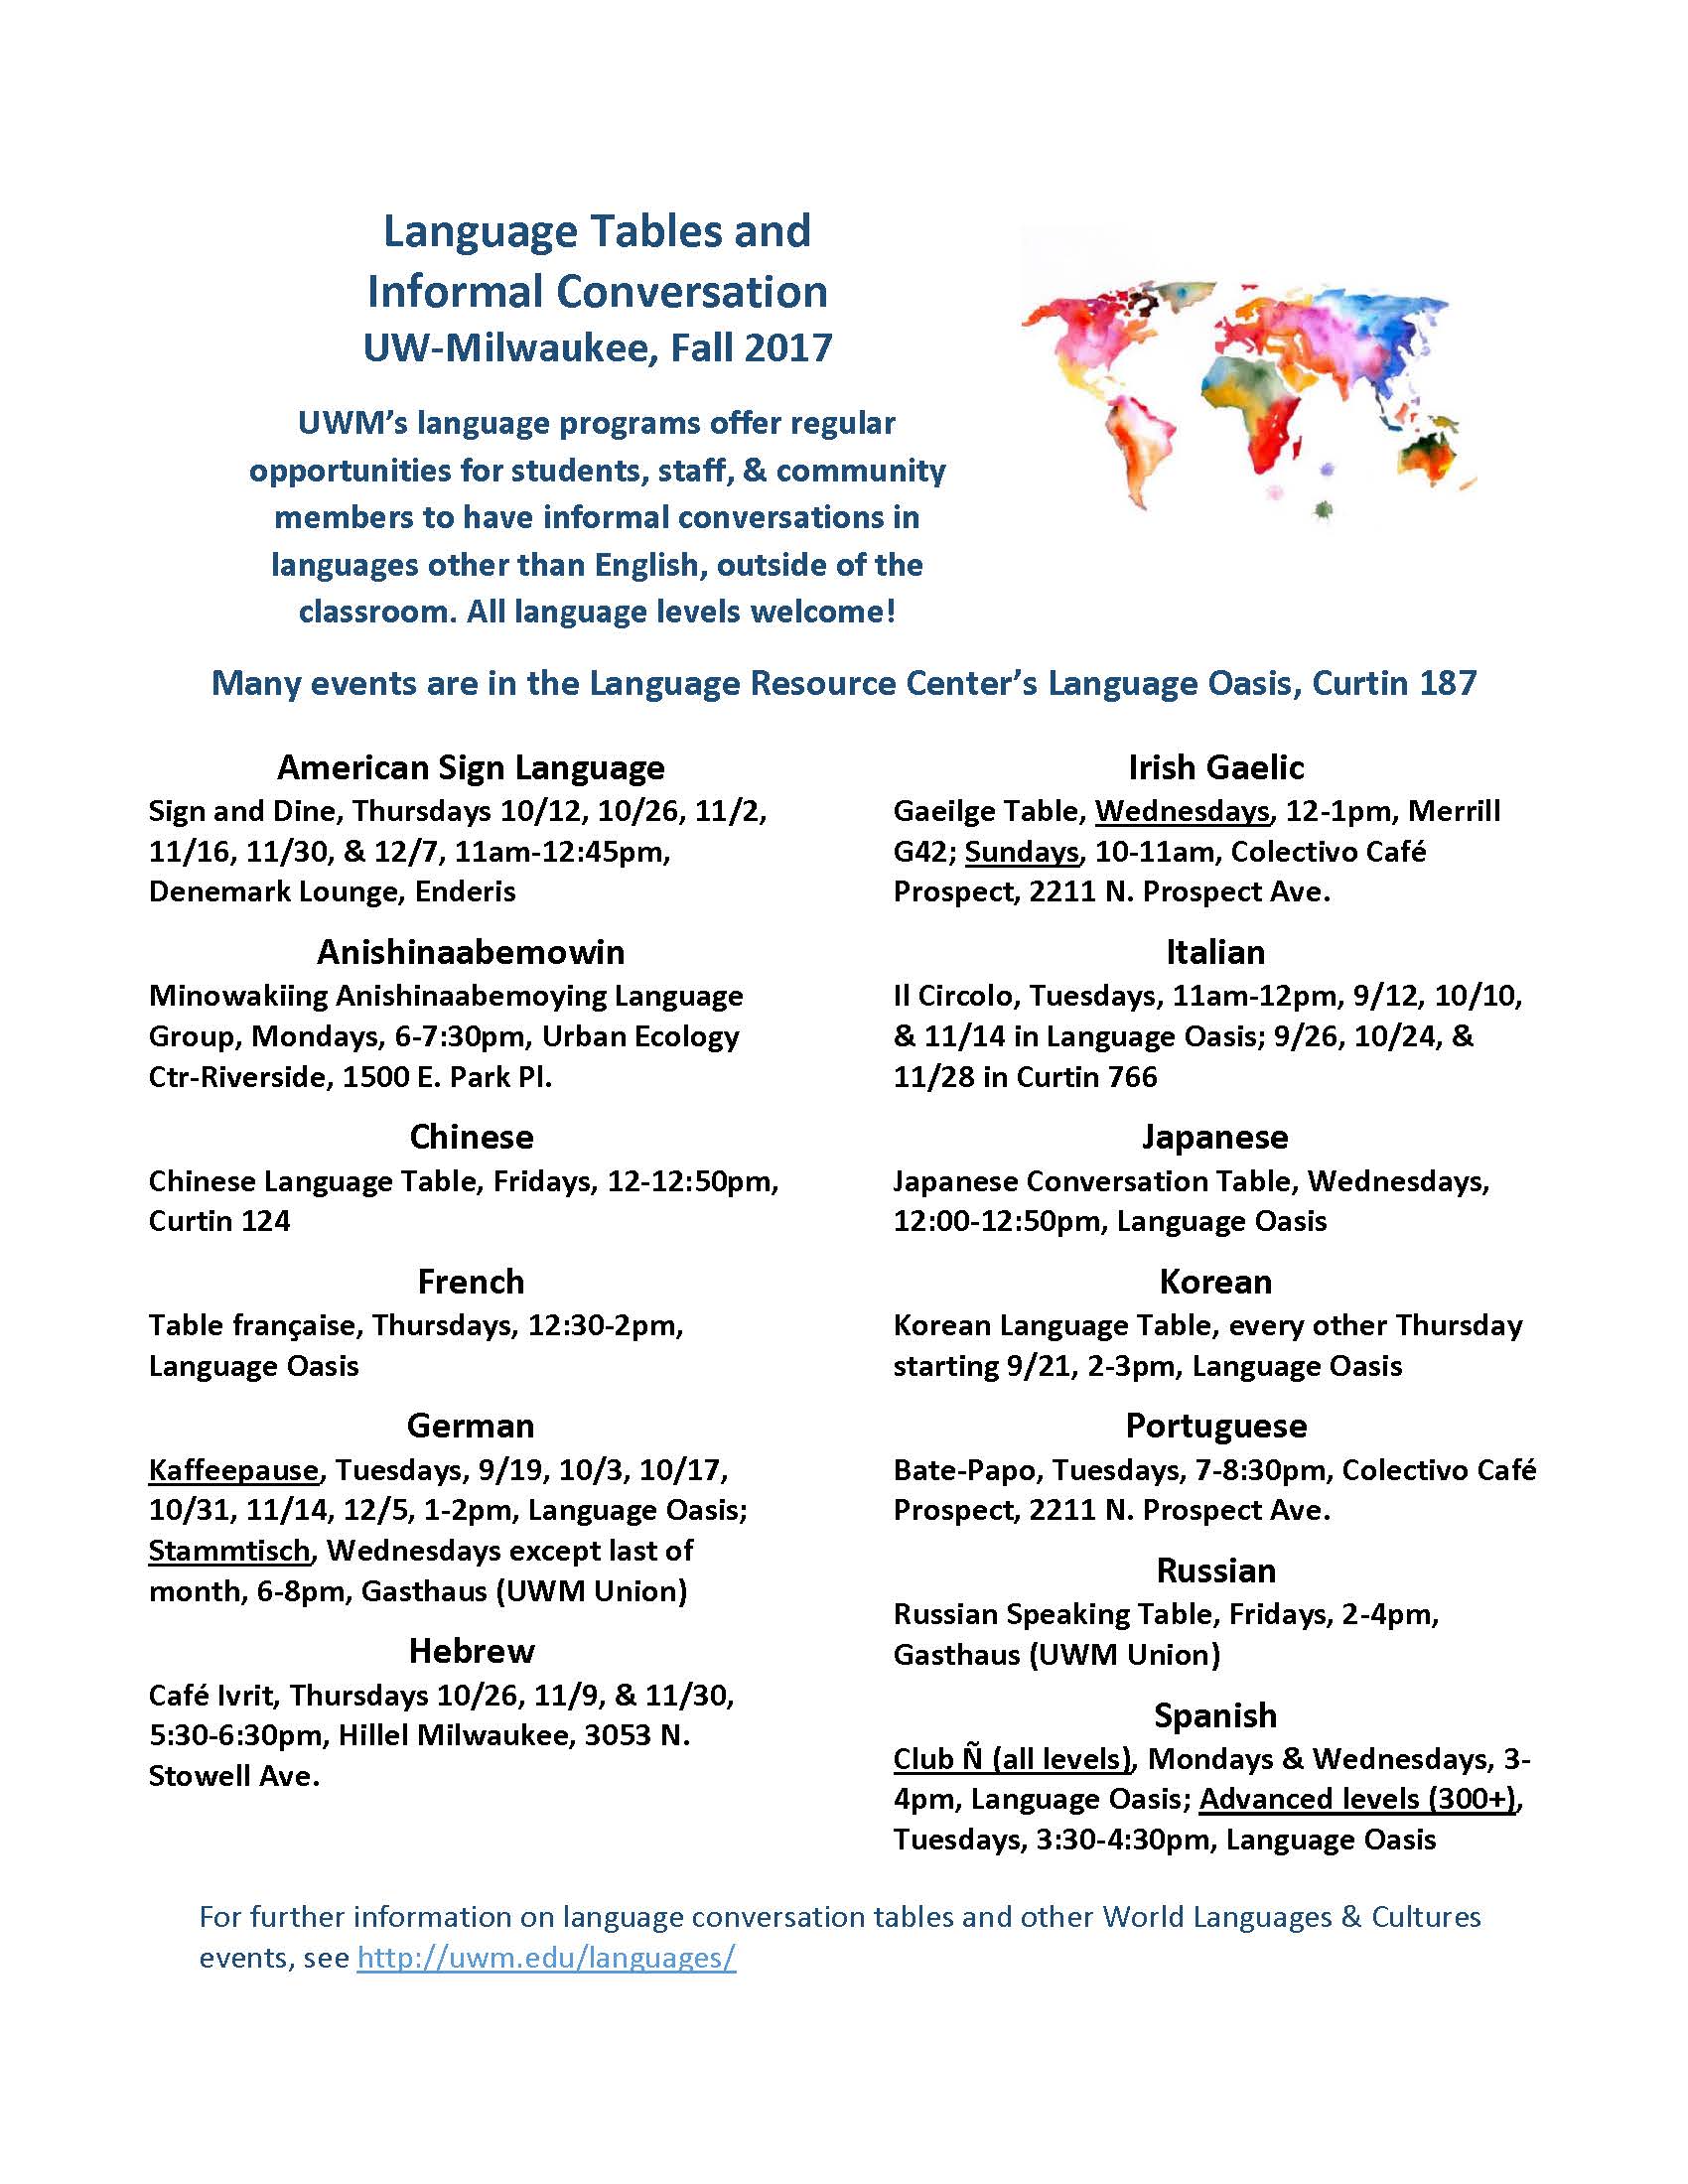 Language Tables And Informal Conversation Fall 2017 Uwm Languages